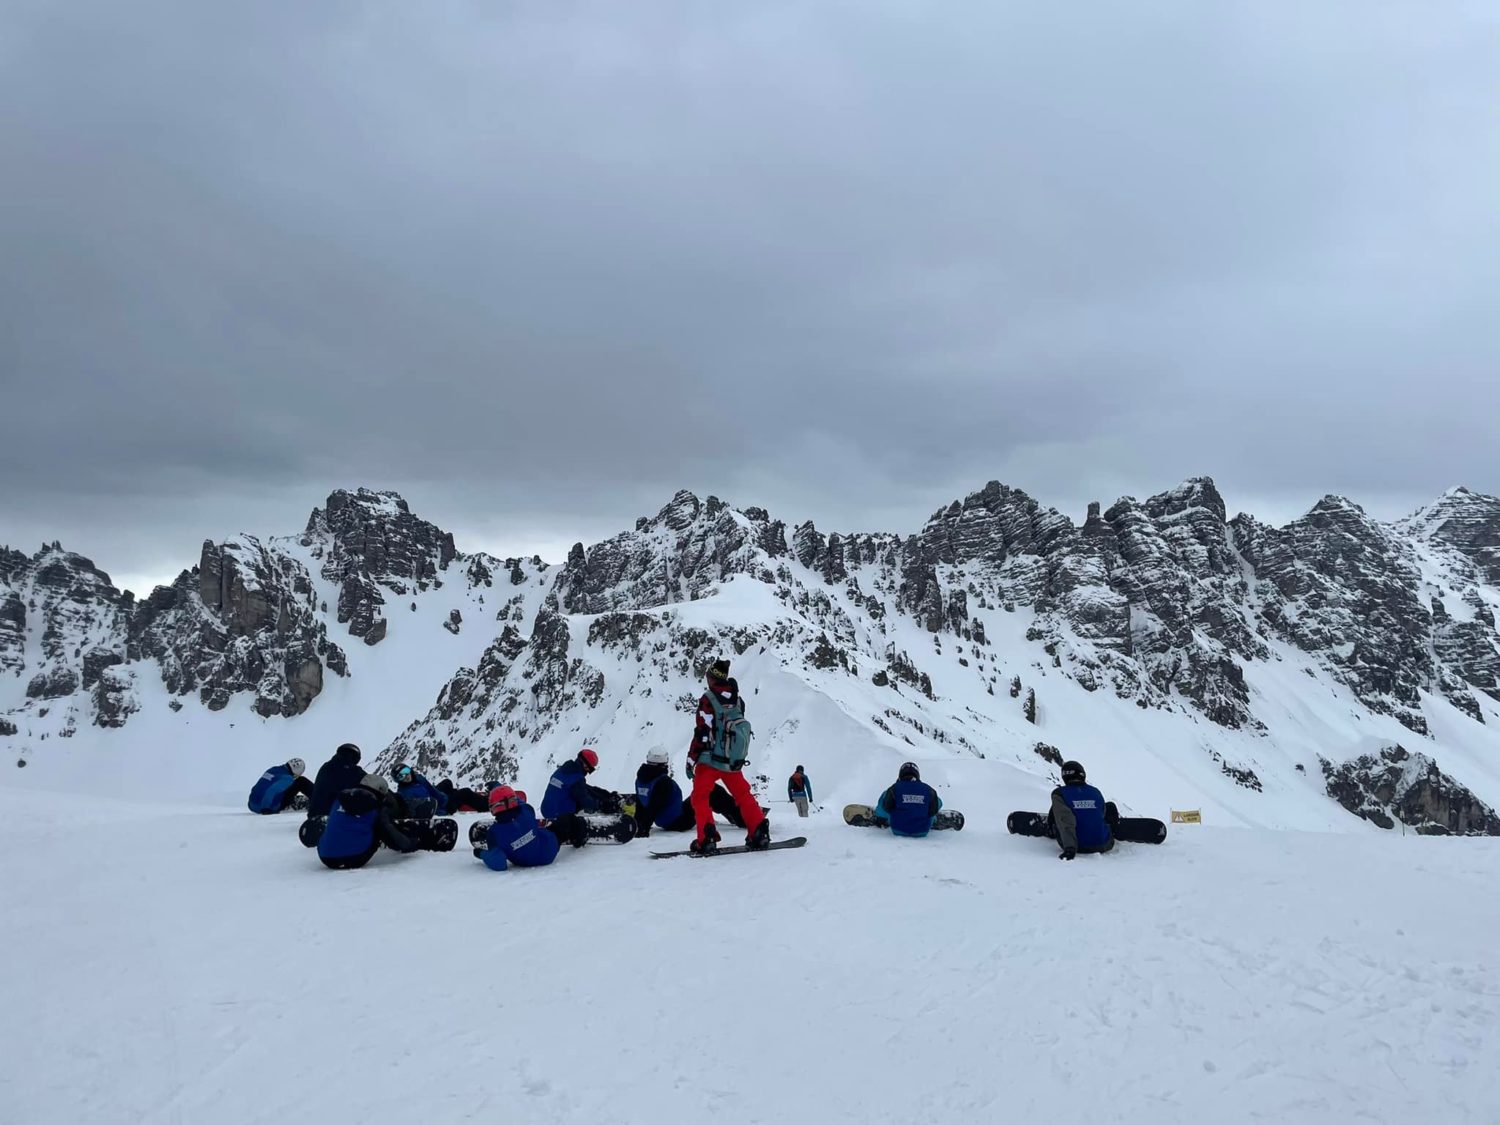 LAB students can be seen perched on the snowy ground, looking up at the mountains whilst on a Ski Trip in Austria.